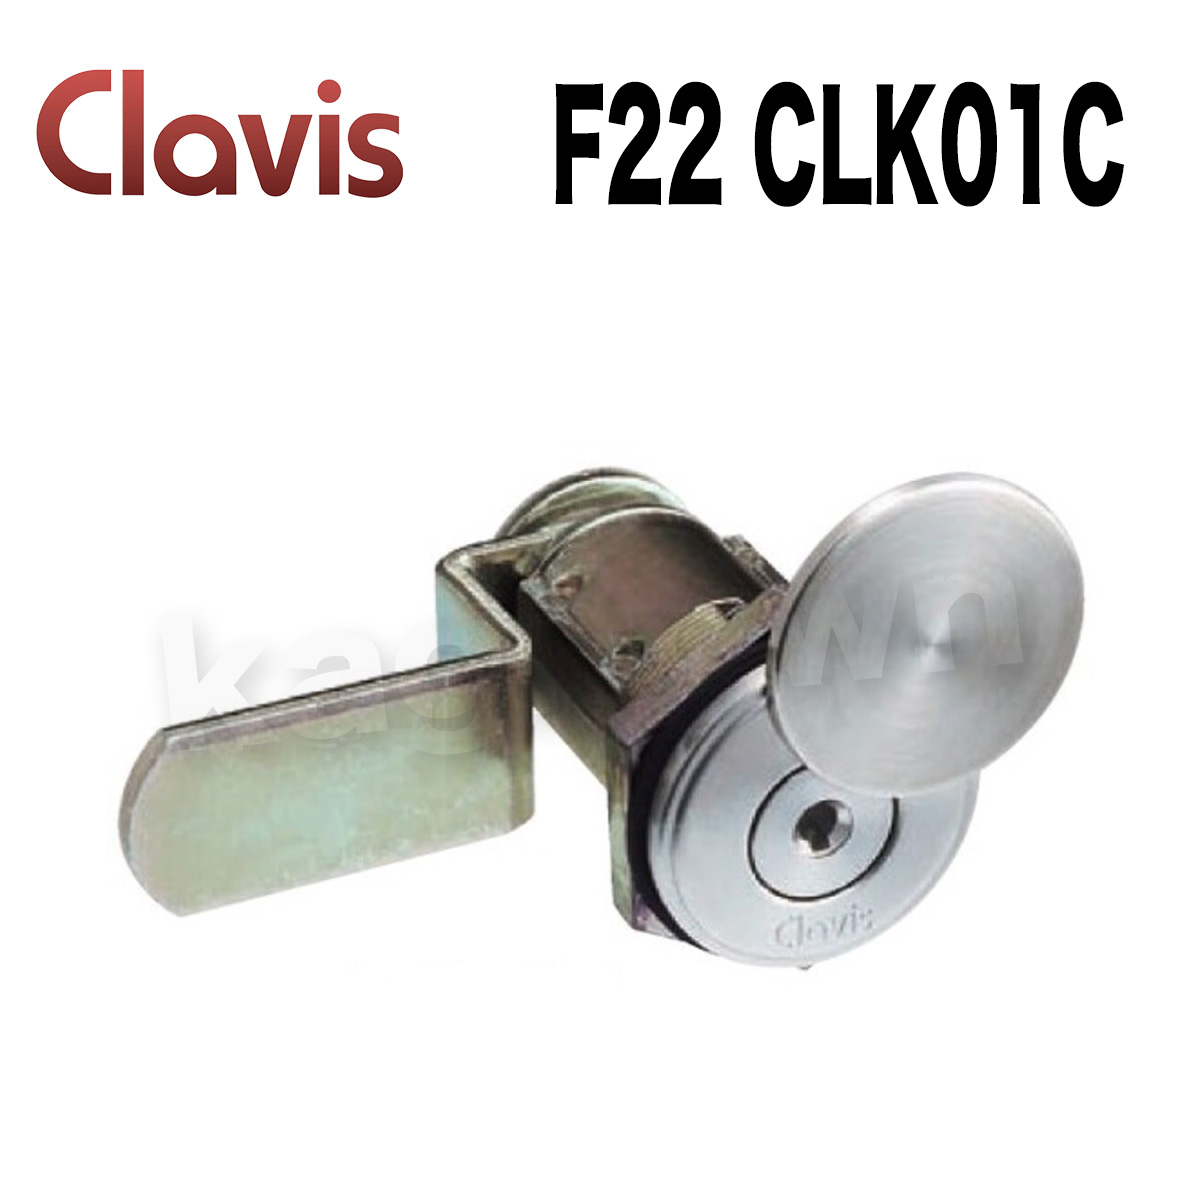 Clavis F22 CLK01C【クラビス】カムロック 約1〜4週間